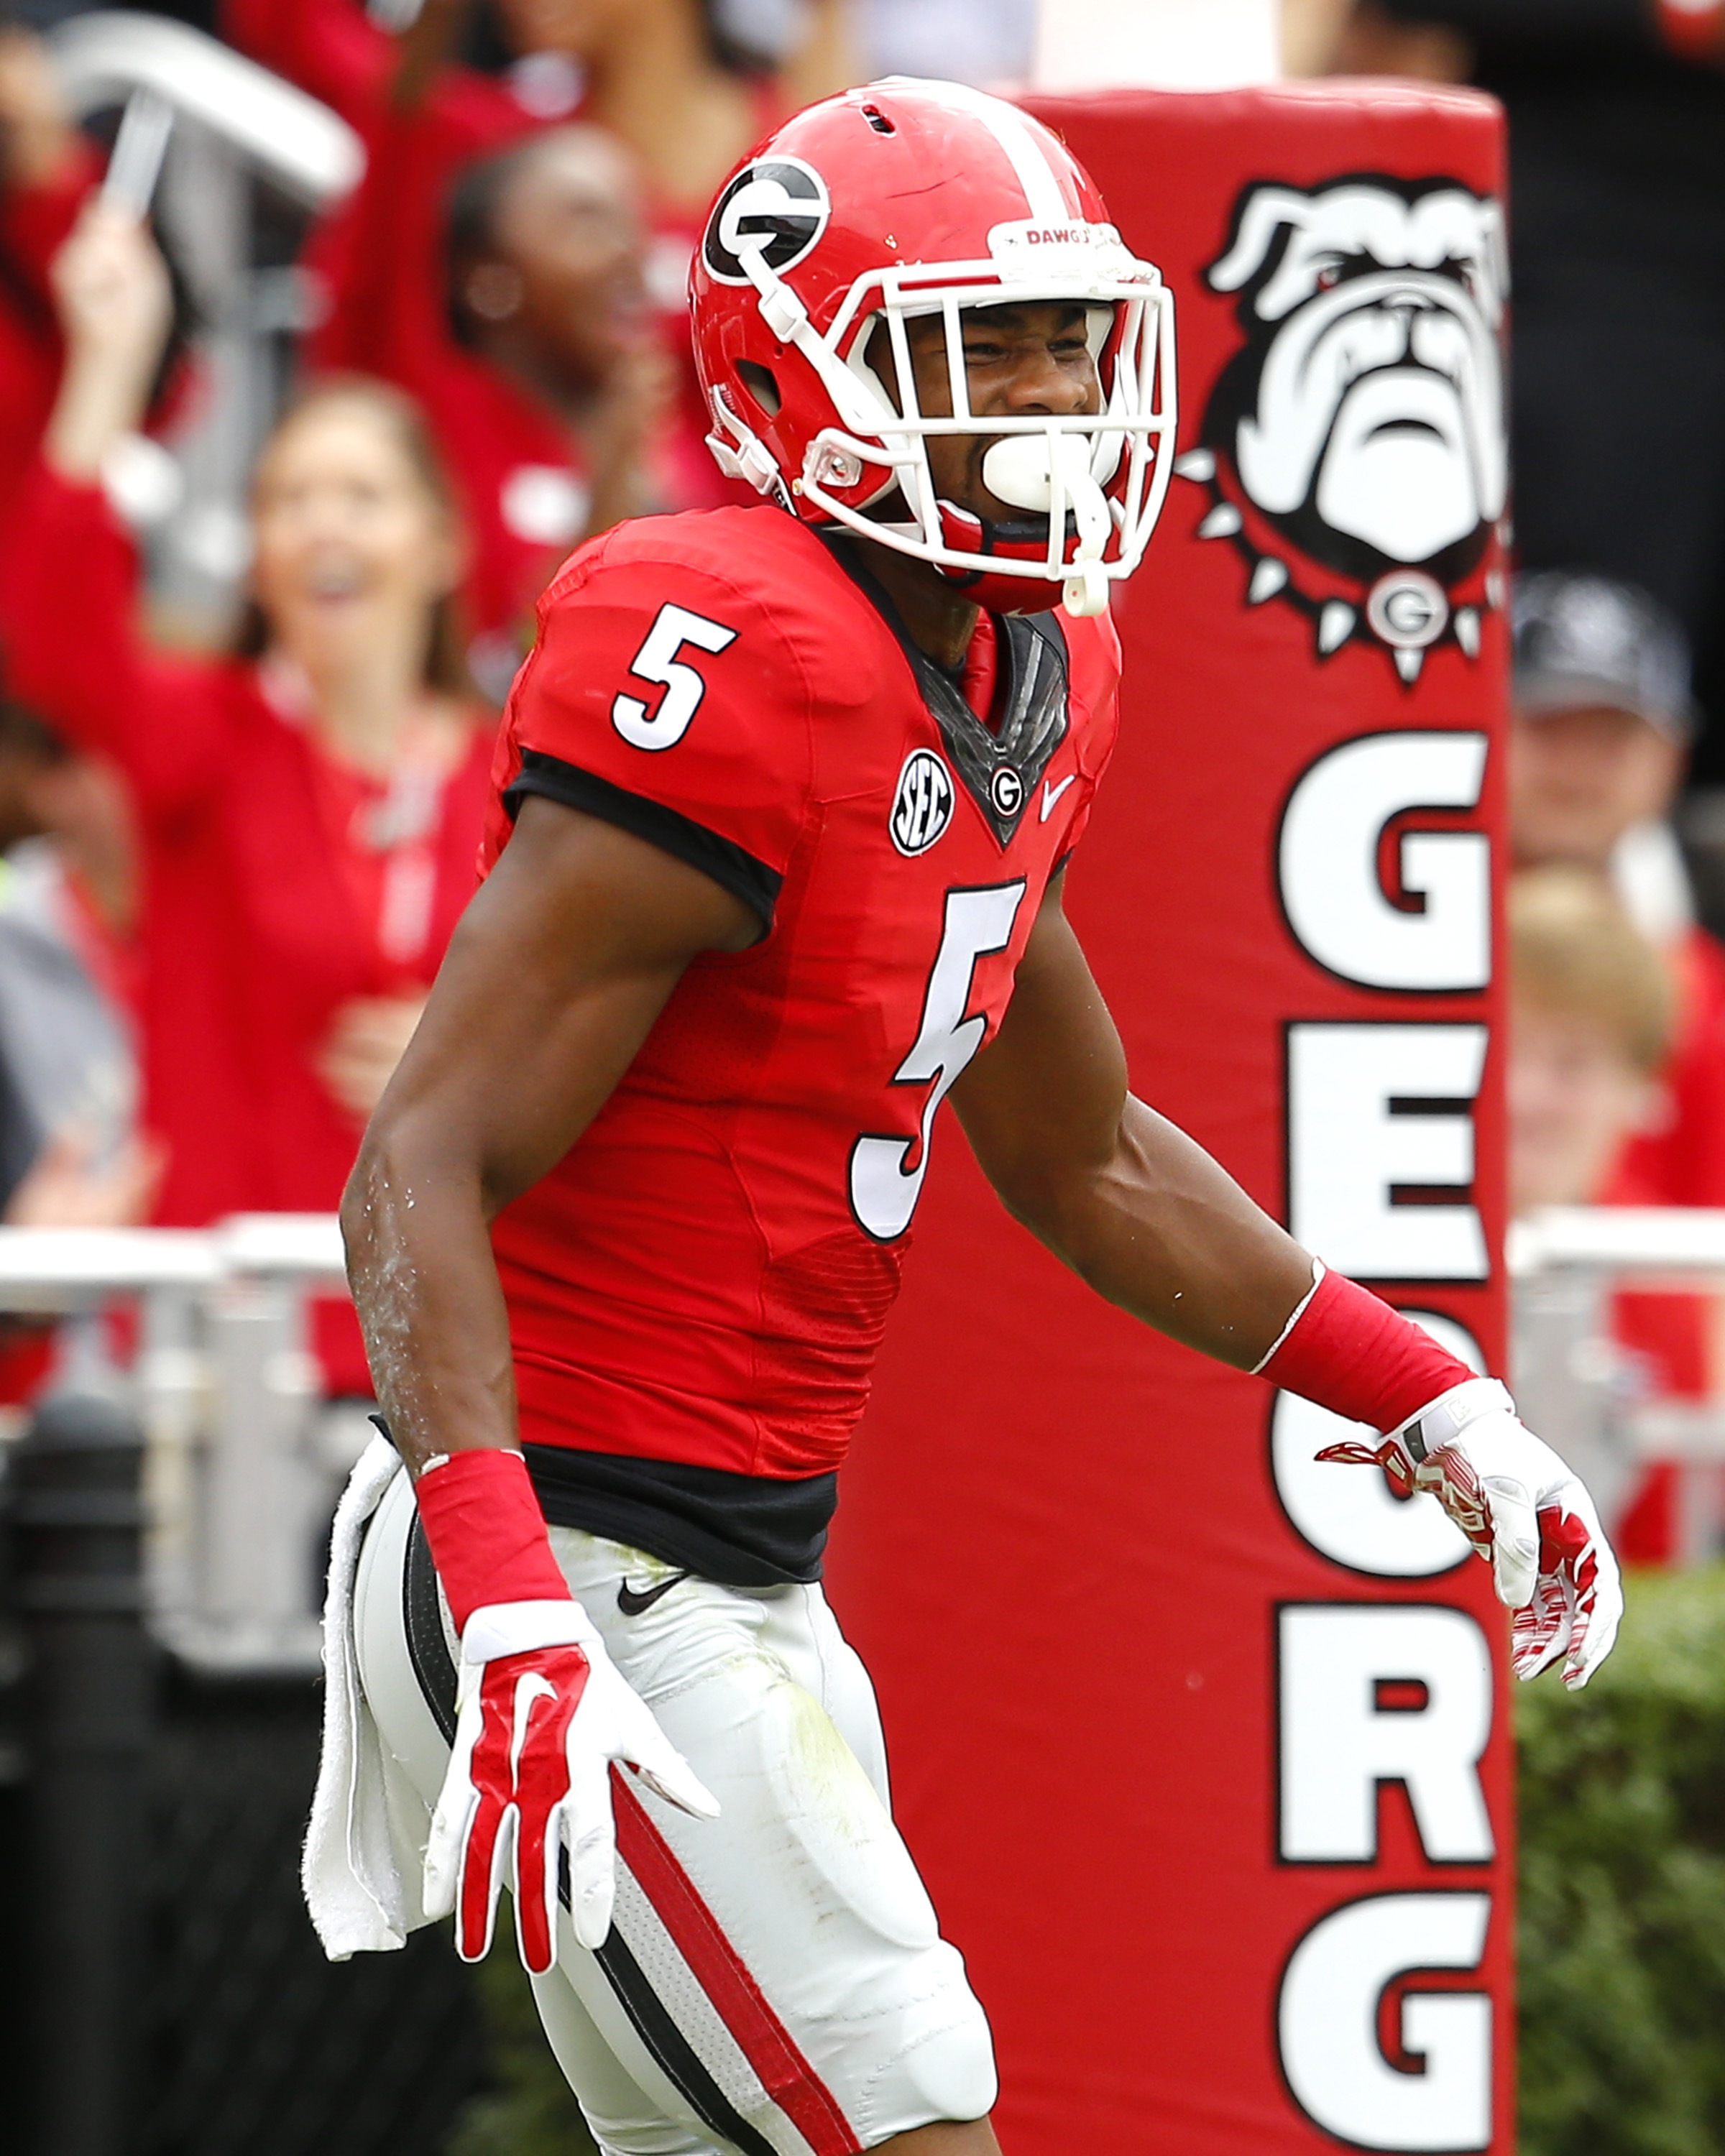 ATHENS, GA - NOVEMBER 7: Terry Godwin #5 of the Georgia Bulldogs reacts after scoring a touchdown in the first quarter of the game against the Kentucky Wildcats on November 7, 2015 at Sanford Stadium in Athens, Georgia. Georgia won the game 27-3. (Credit: Todd Kirkland/Getty Images) *** Local Caption *** Terry Godwin